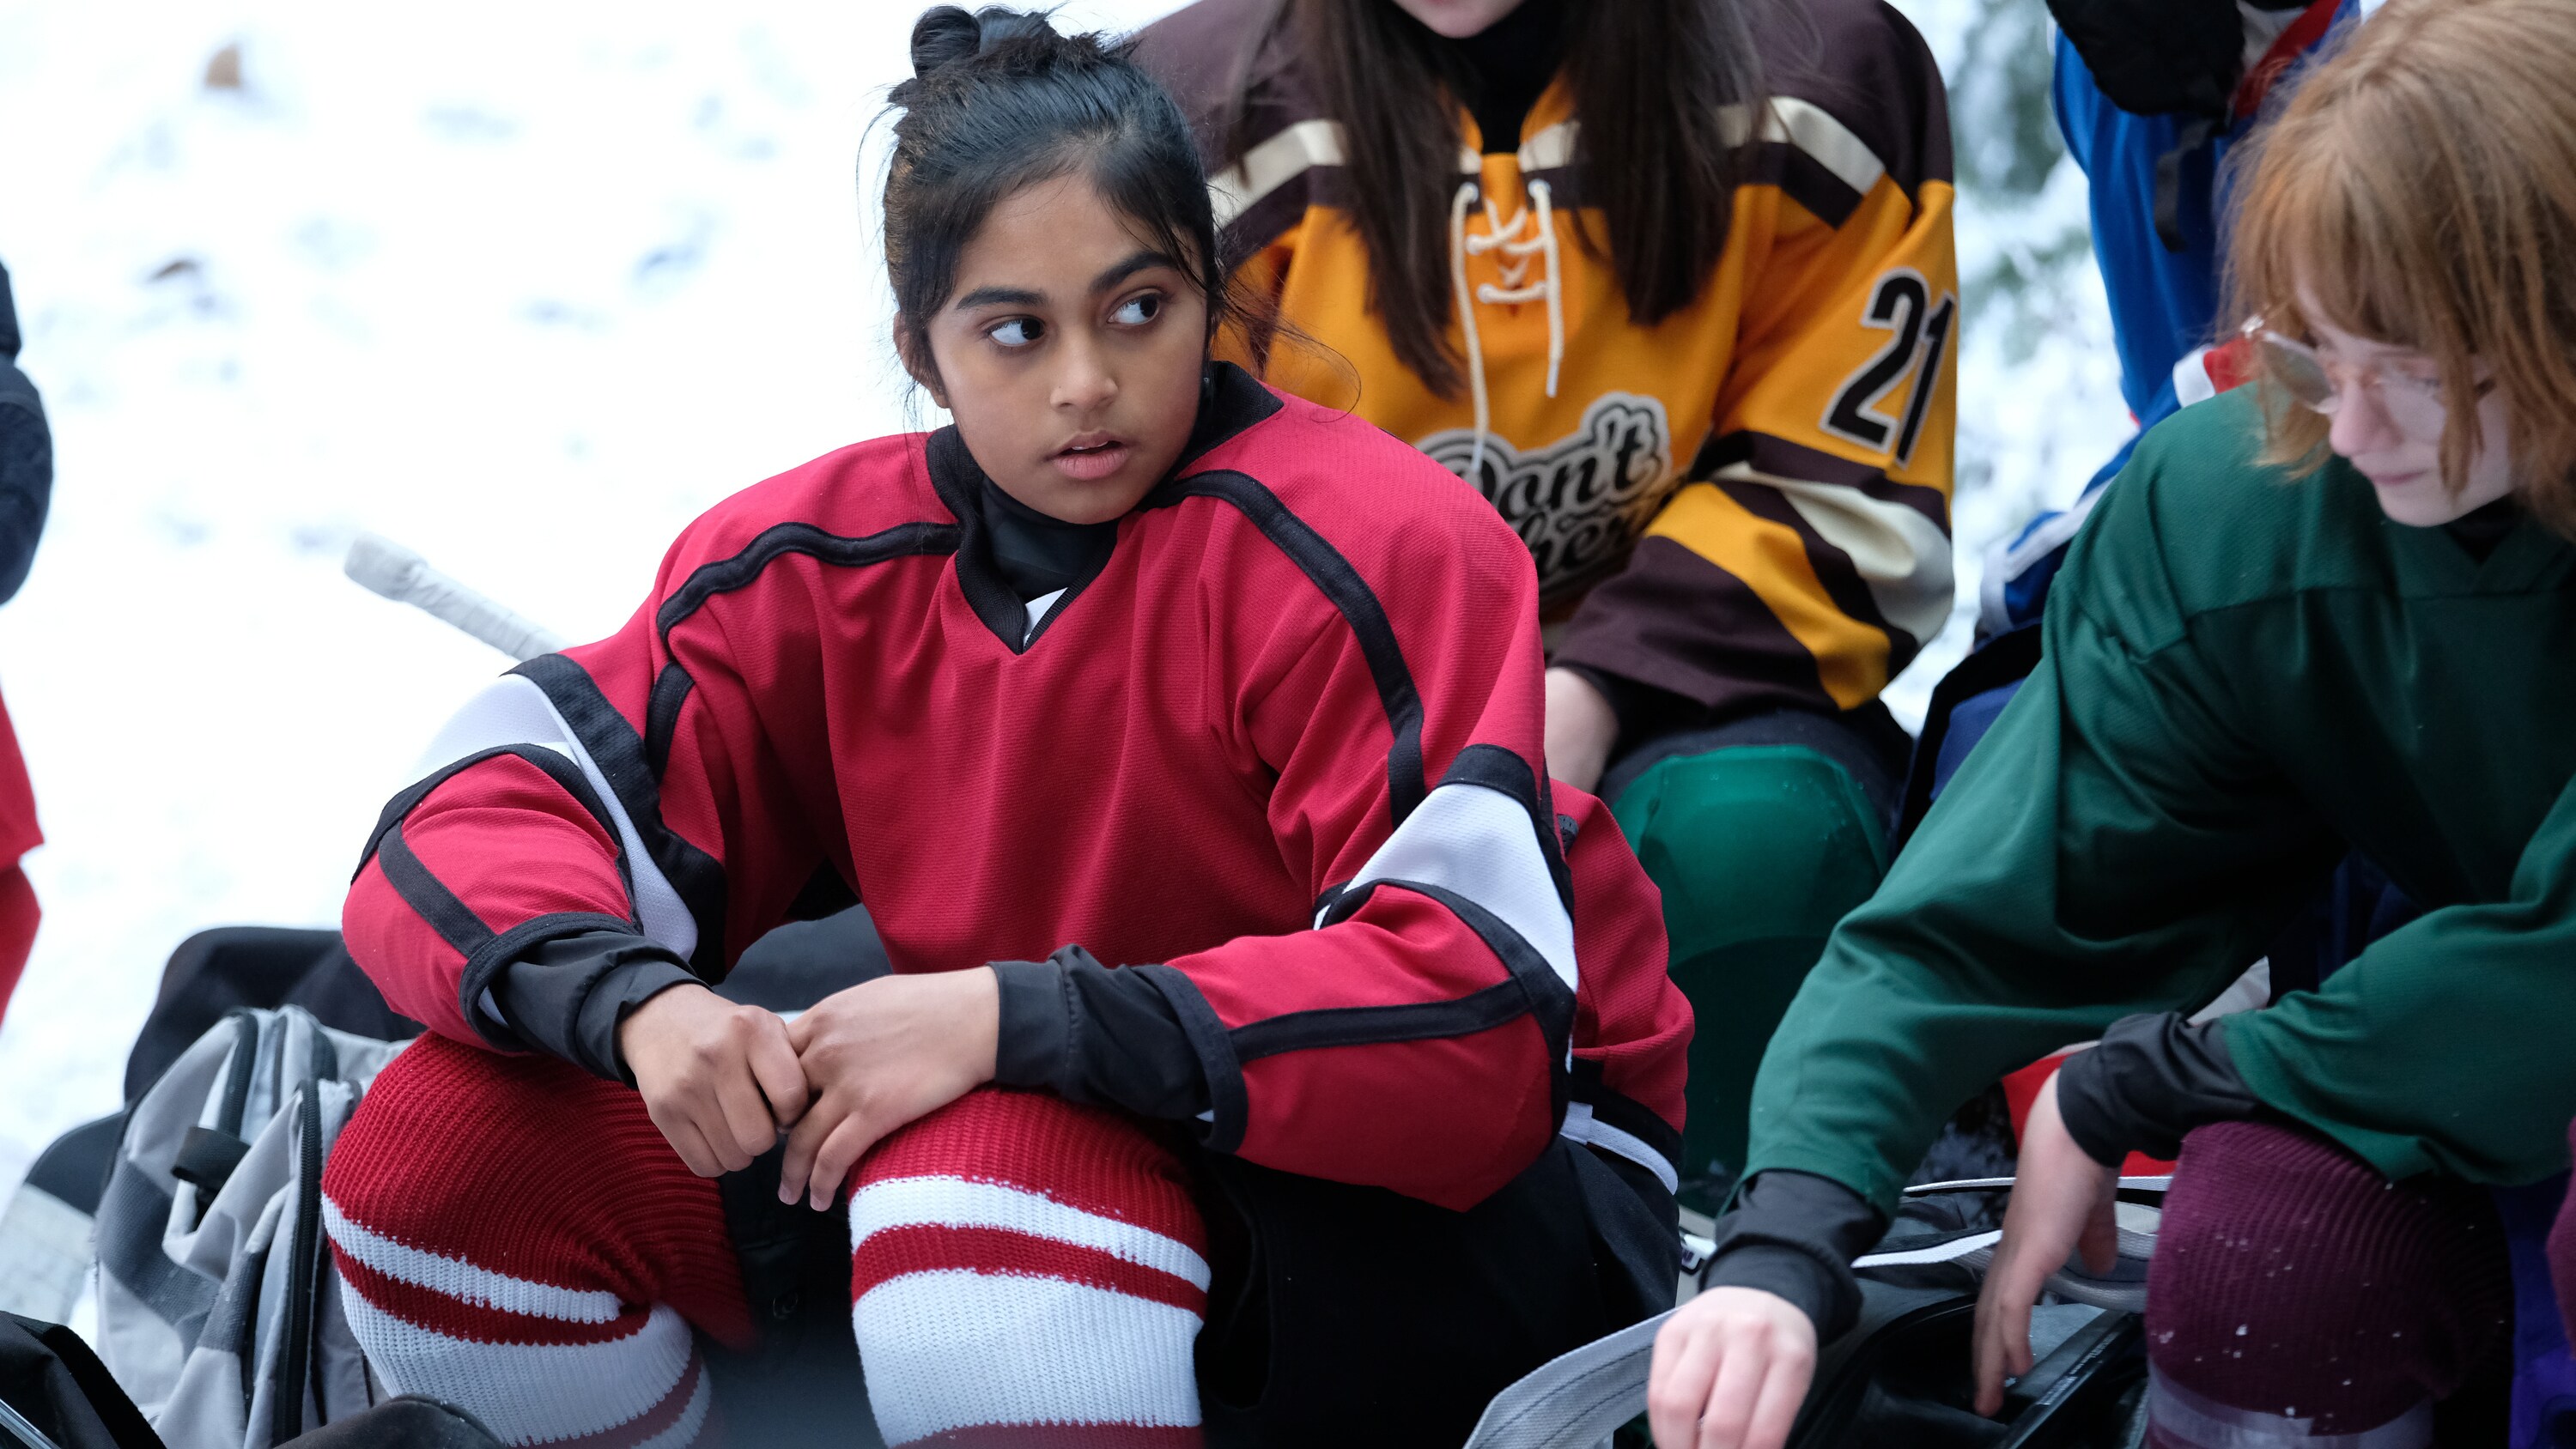 THE MIGHTY DUCKS: GAME CHANGERS - "Pond Hockey" - With the team mad at Evan, and Alex unsure of her coaching skills, Bombay brings them somewhere new. (Disney/Liane Hentscher) SWAYAM BHATIA